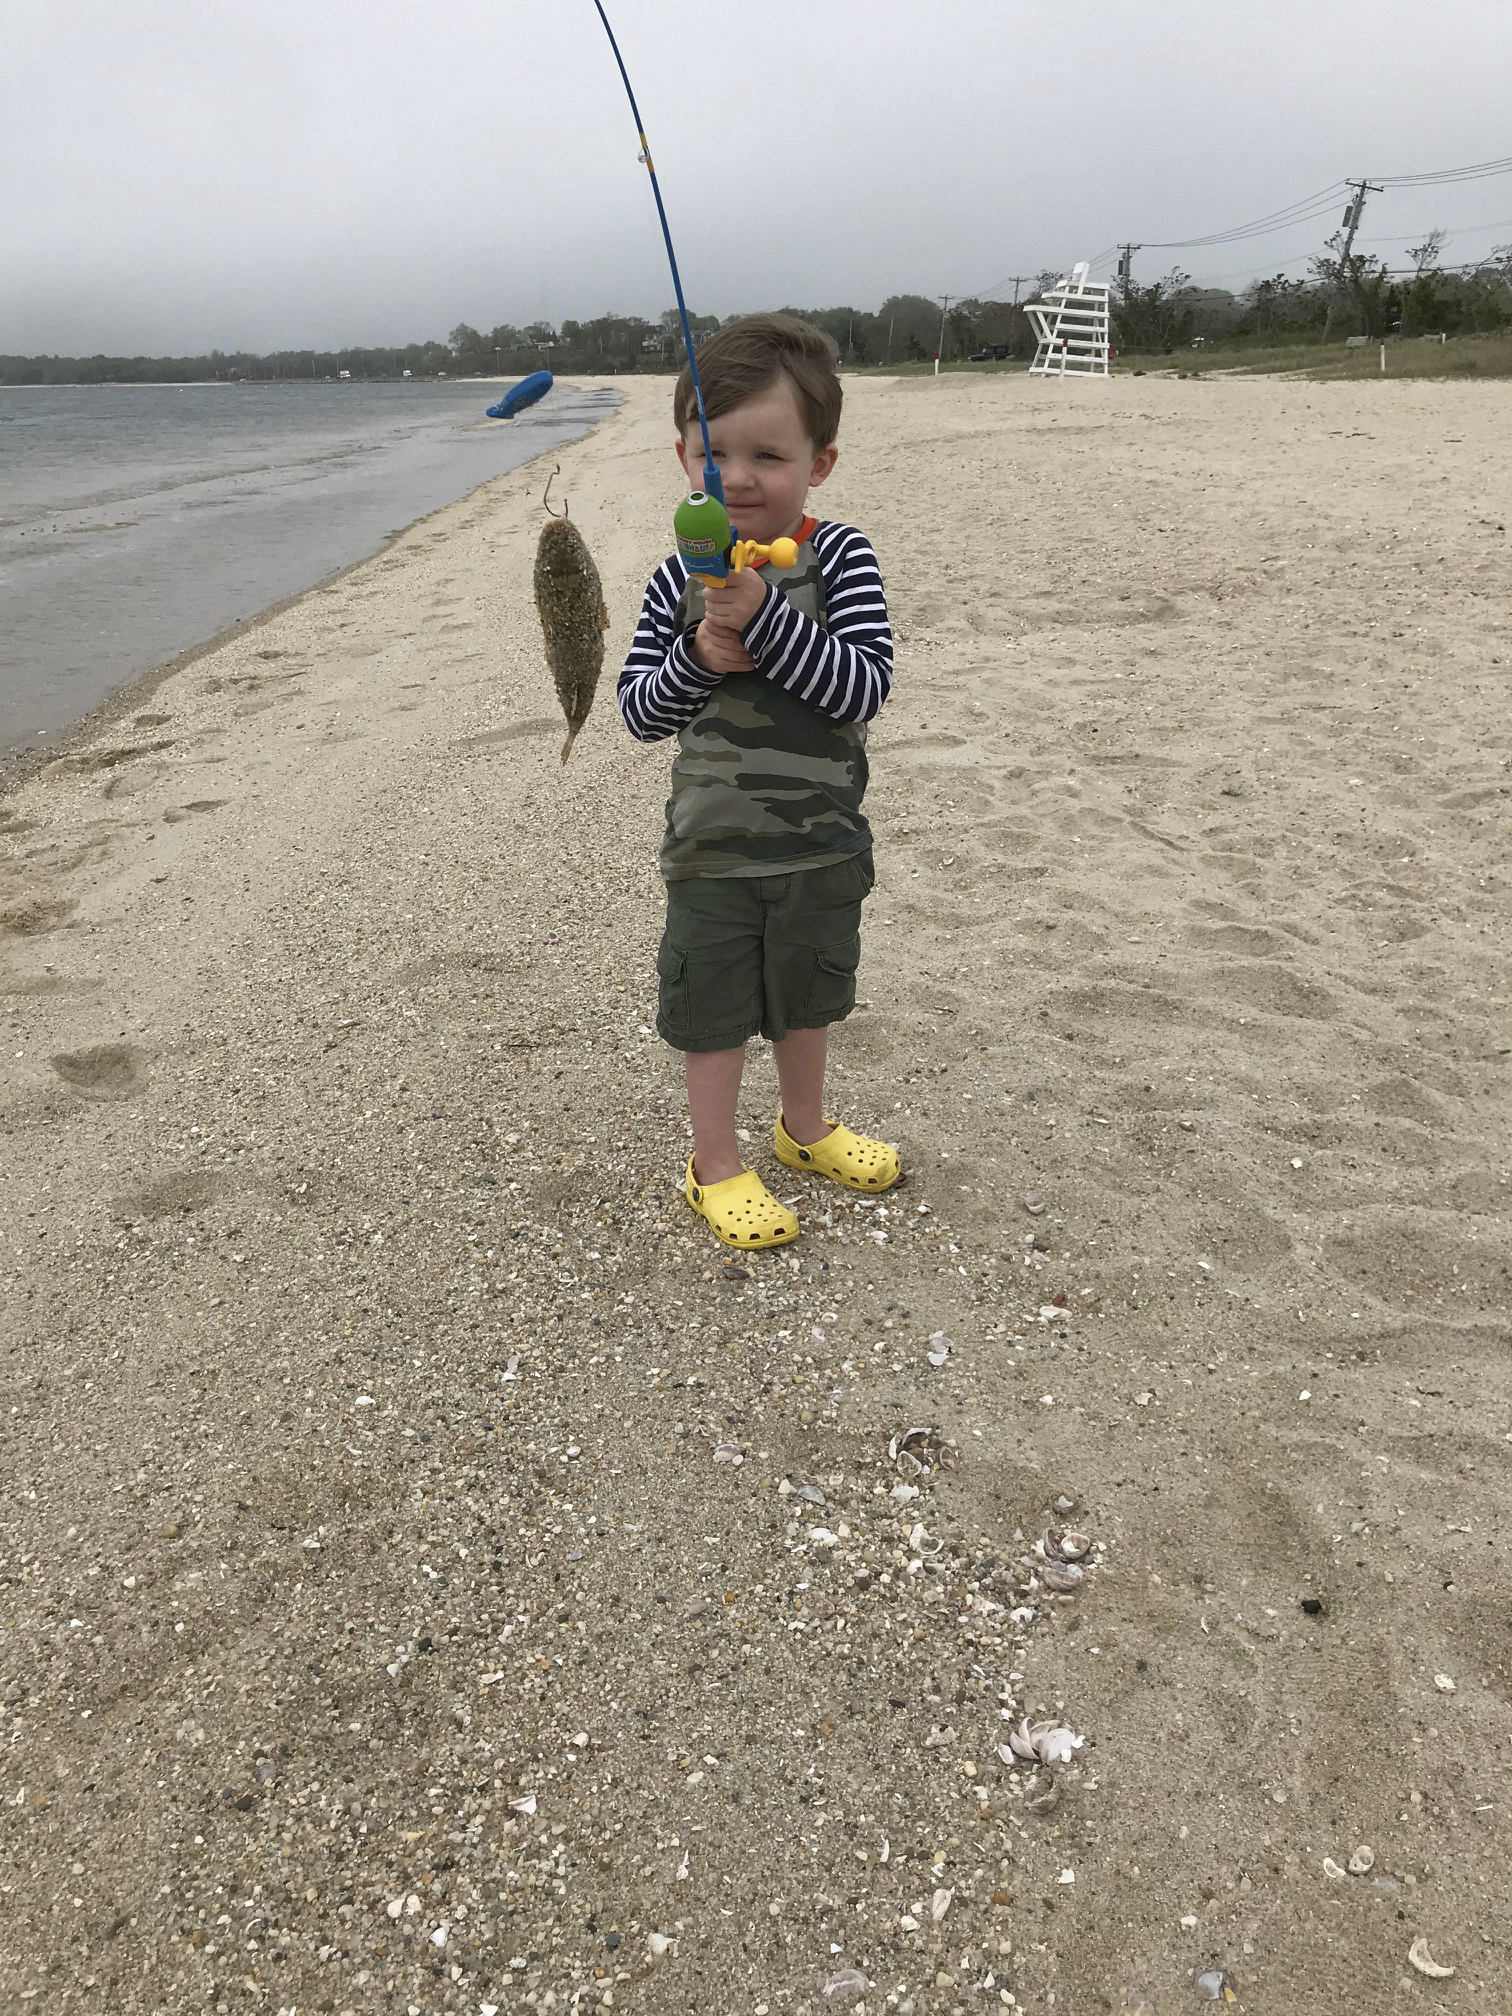 Three-year-old Henry Schubert from Huntington,  recently caught his first fish on the first cast on Long Beach while visiting his grandfather Mark Haslinger in Bay Point.  COURTESY MARK HASLINGER